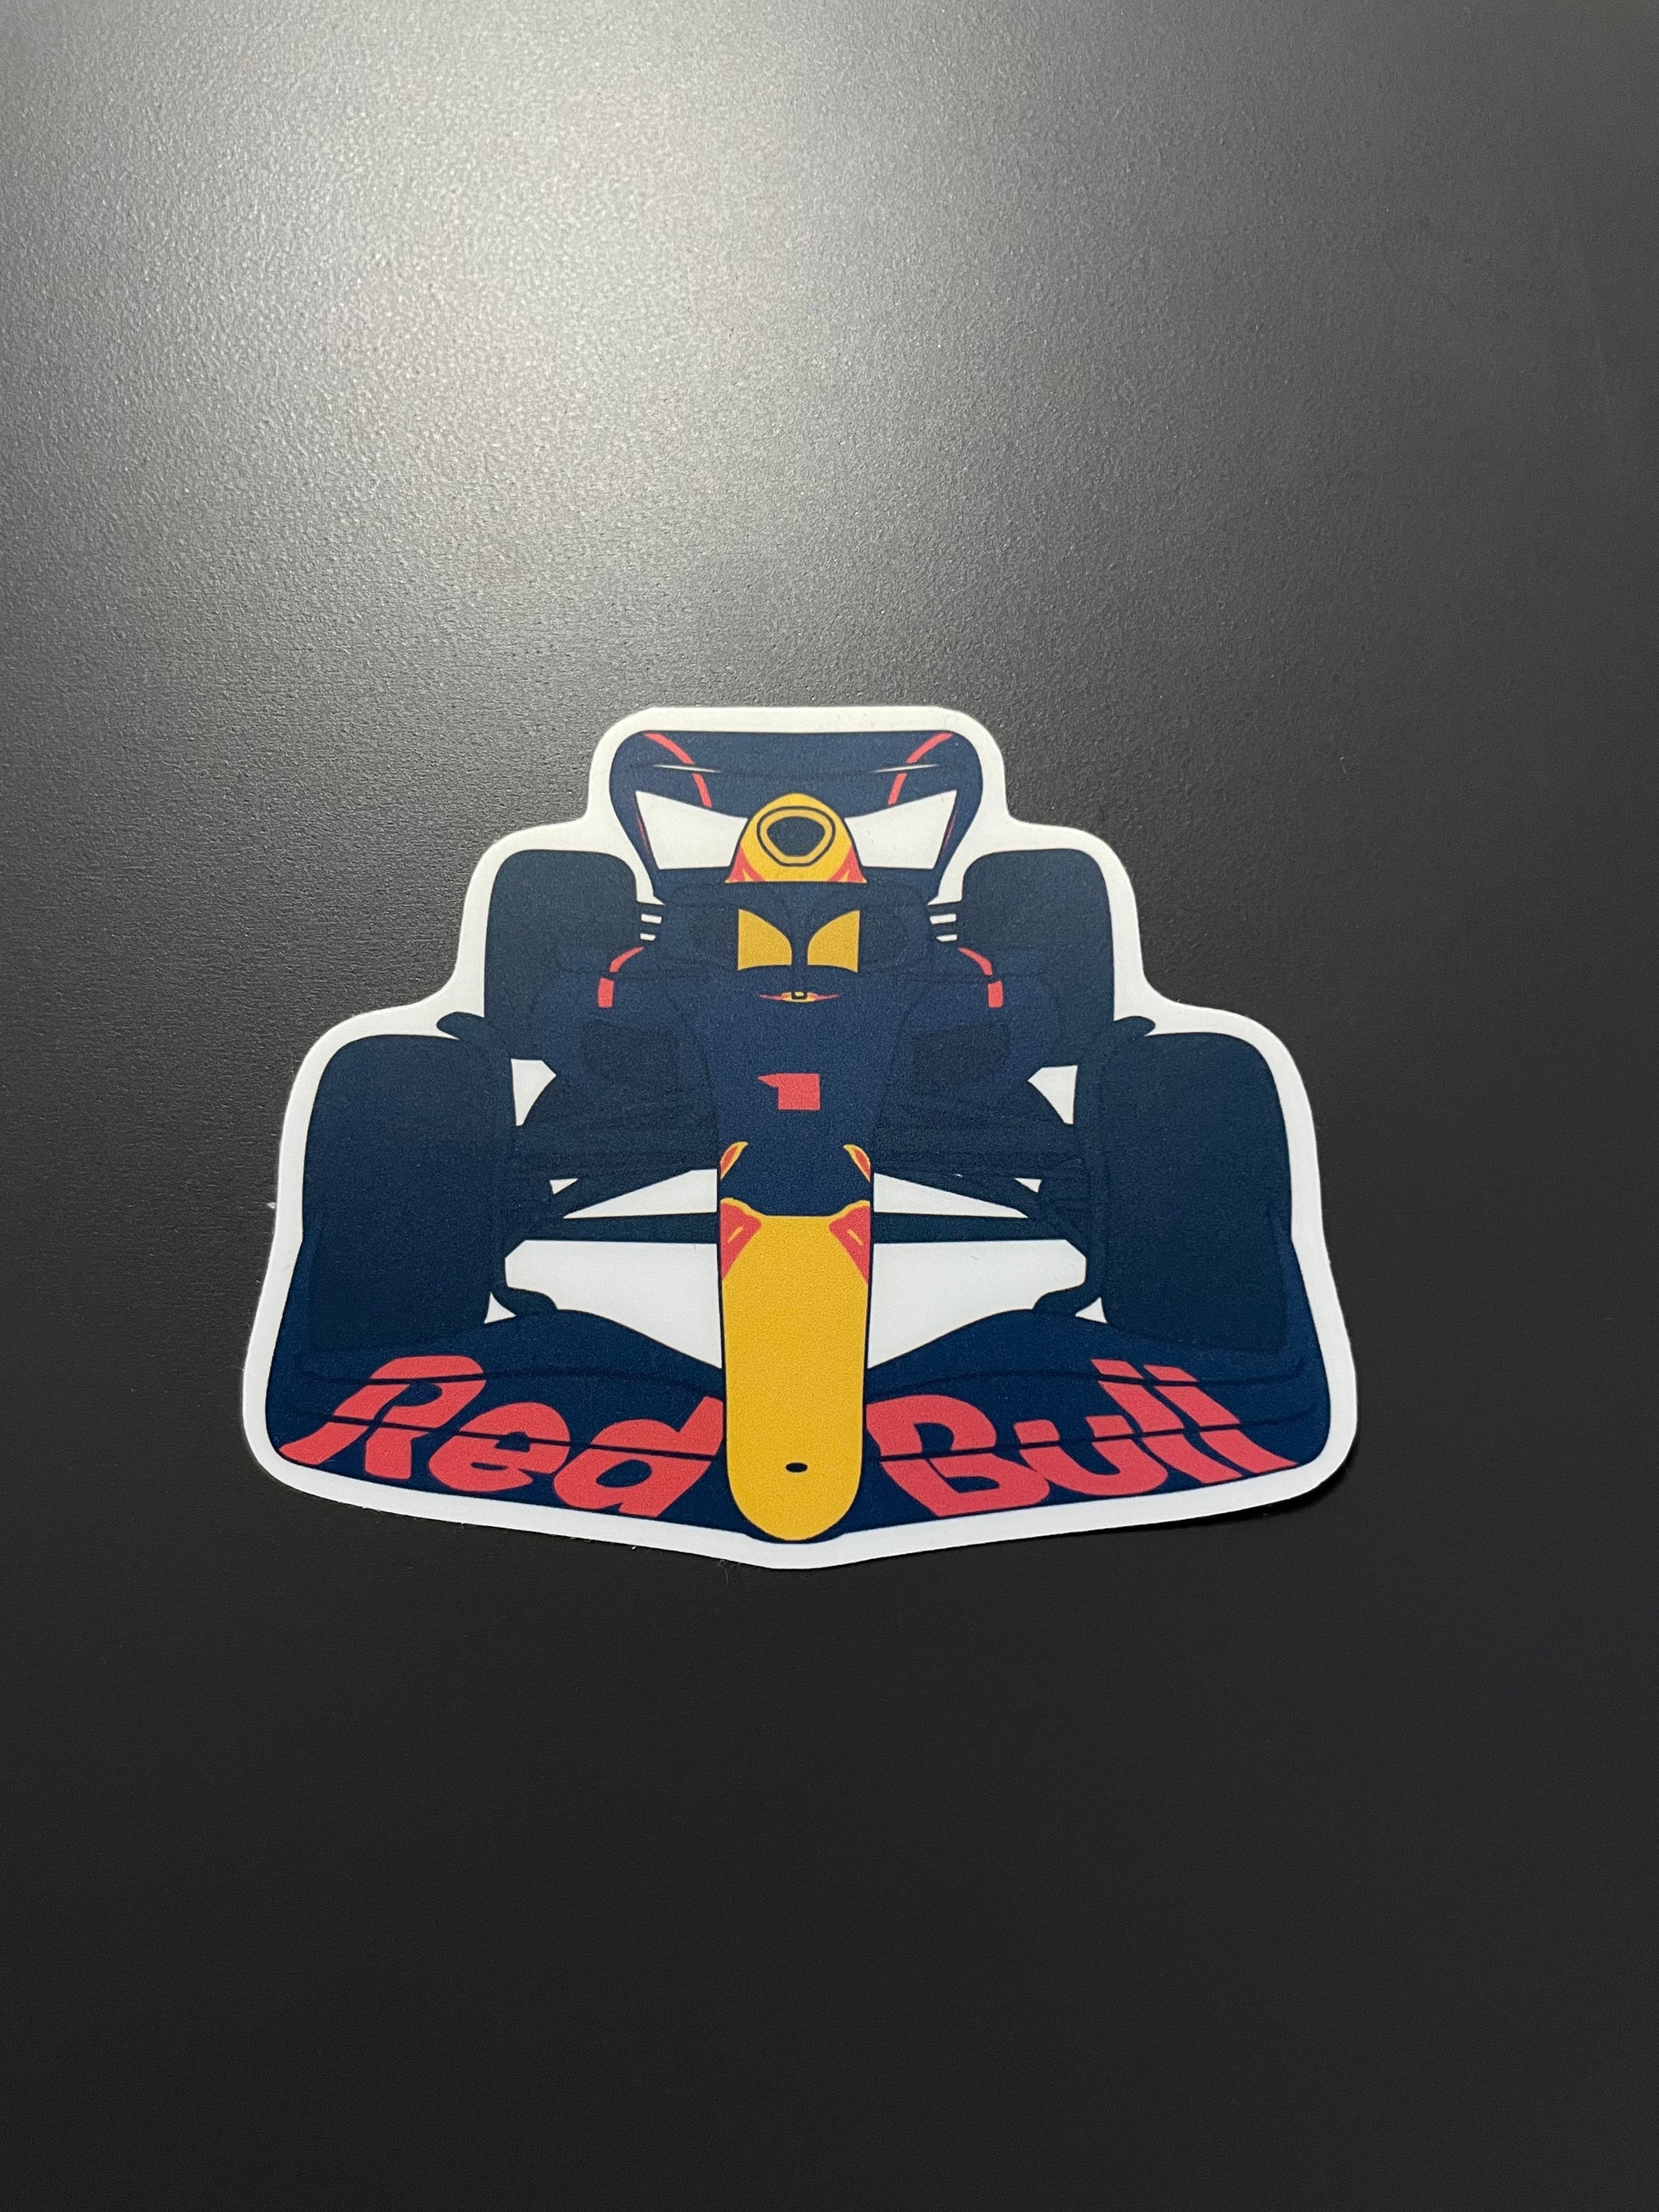 Redbull Stickers for Sale